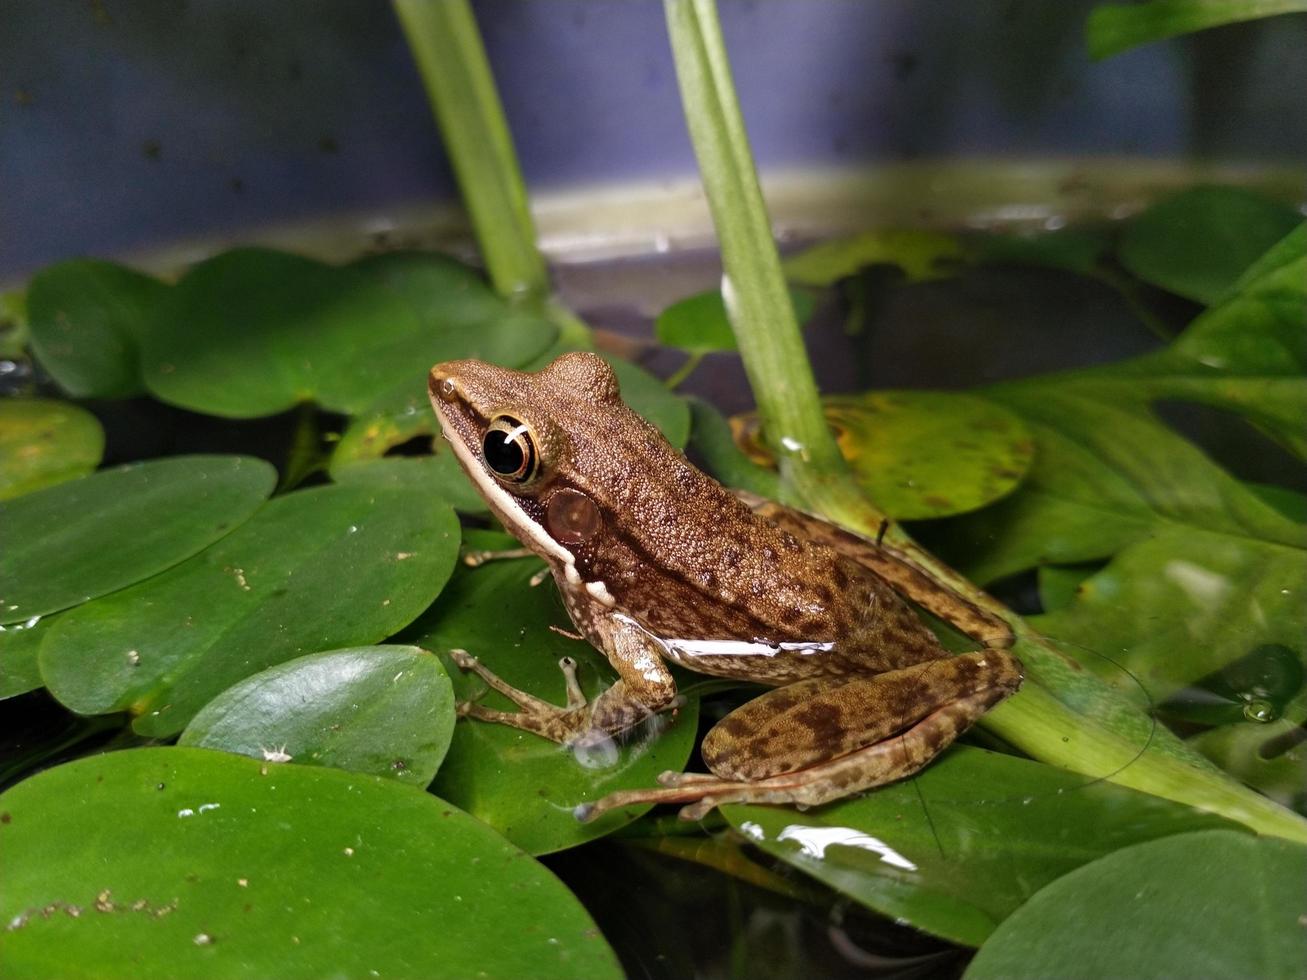 a frog on the pond among the water plants. This photo is suitable for anything related to nature, environment, wildlife, amphibian, pond, ecosystem, biological, biodiversity.